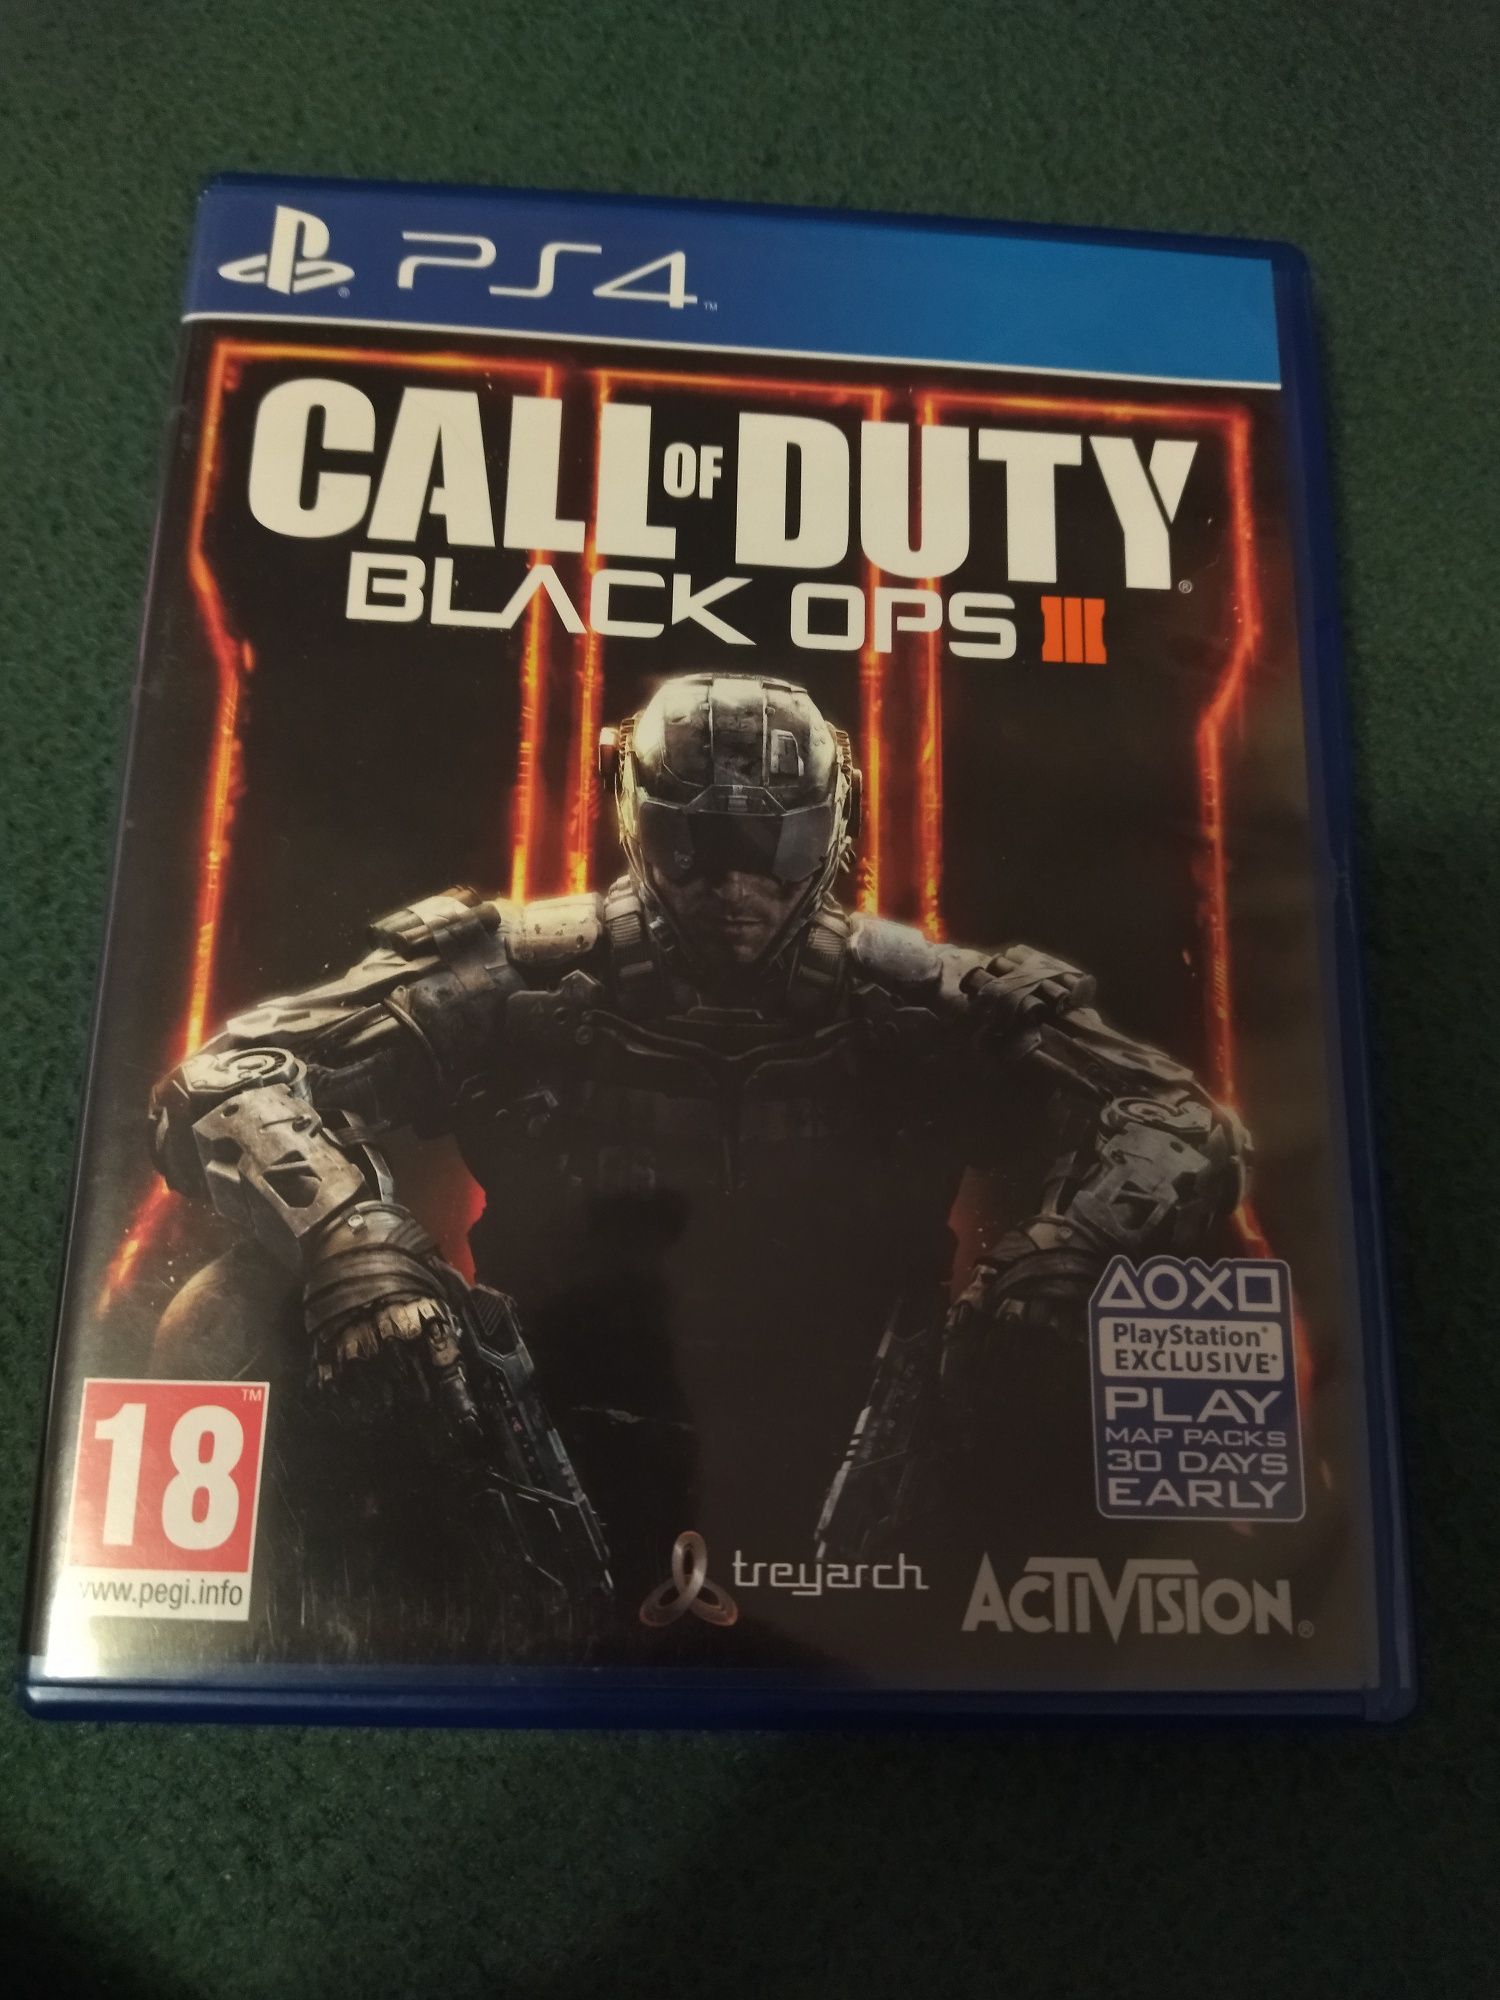 Call of Duty Black OPS 3